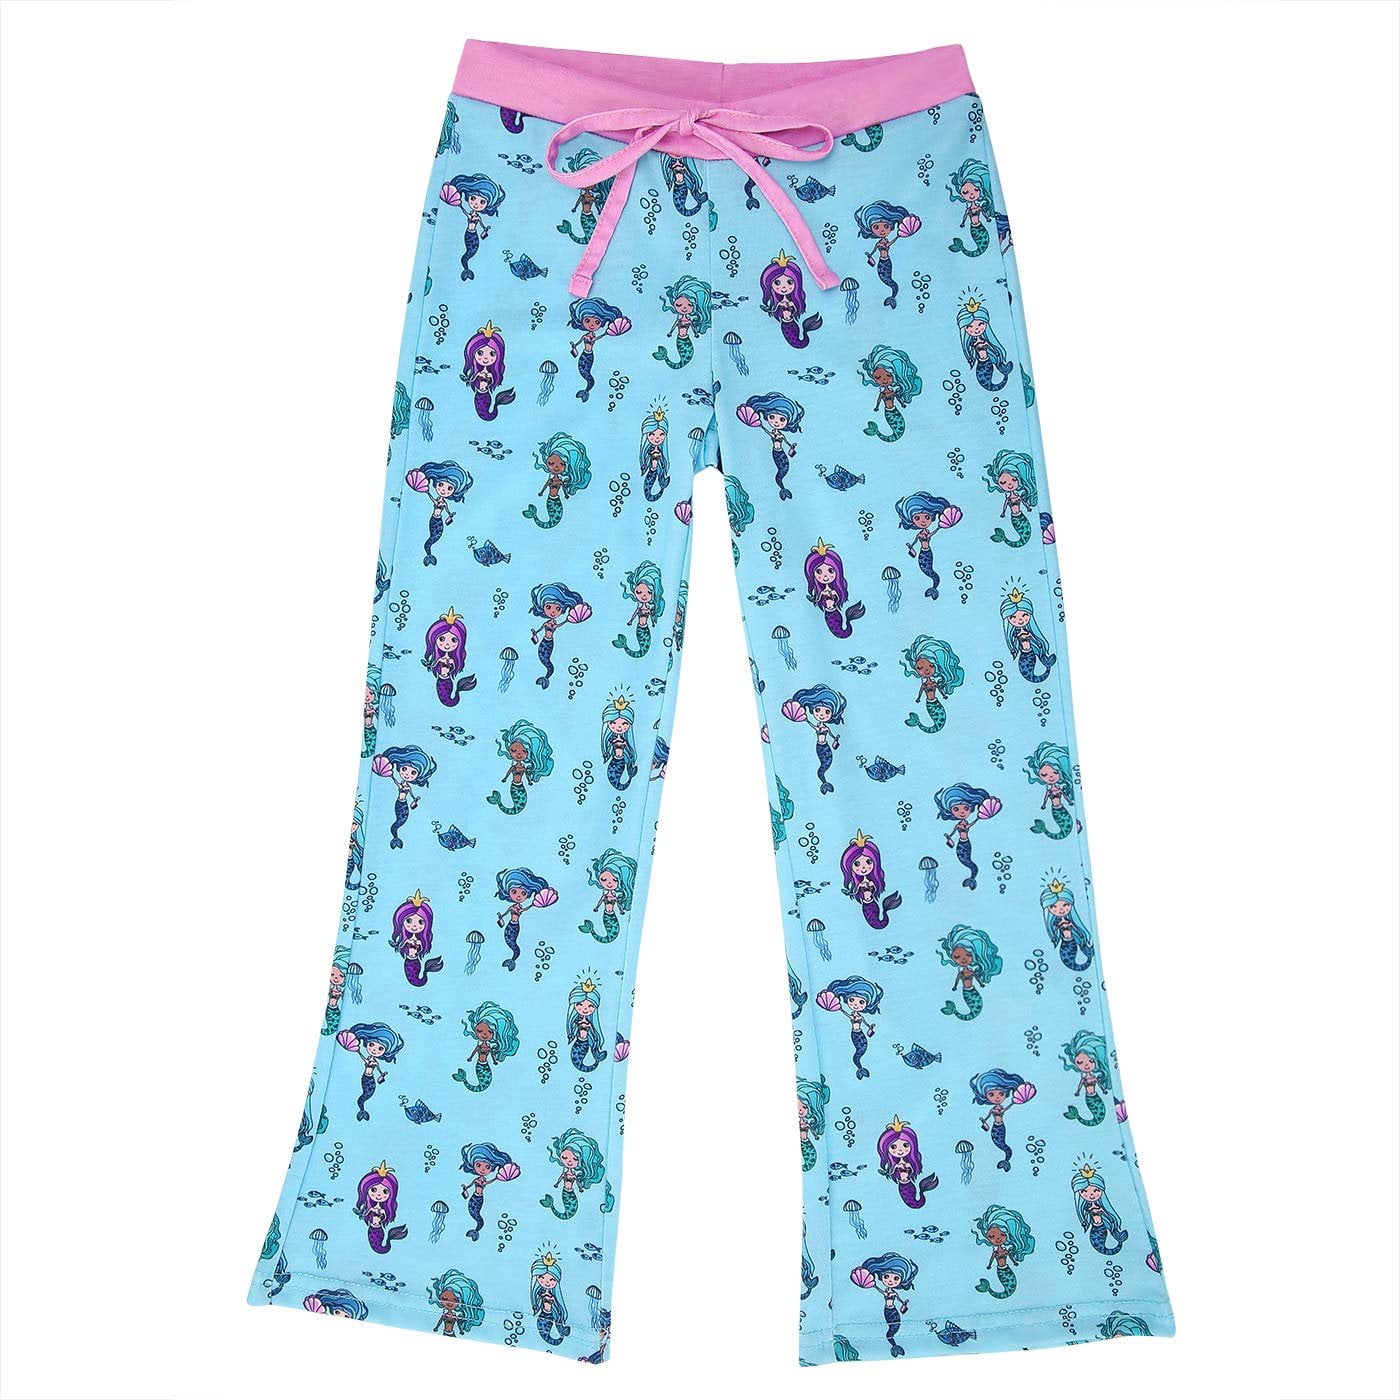 Funnycokid Girls Fleece Pants Lounge 3D Graphic Flannel Trousers Bottoms 5-12 Years 